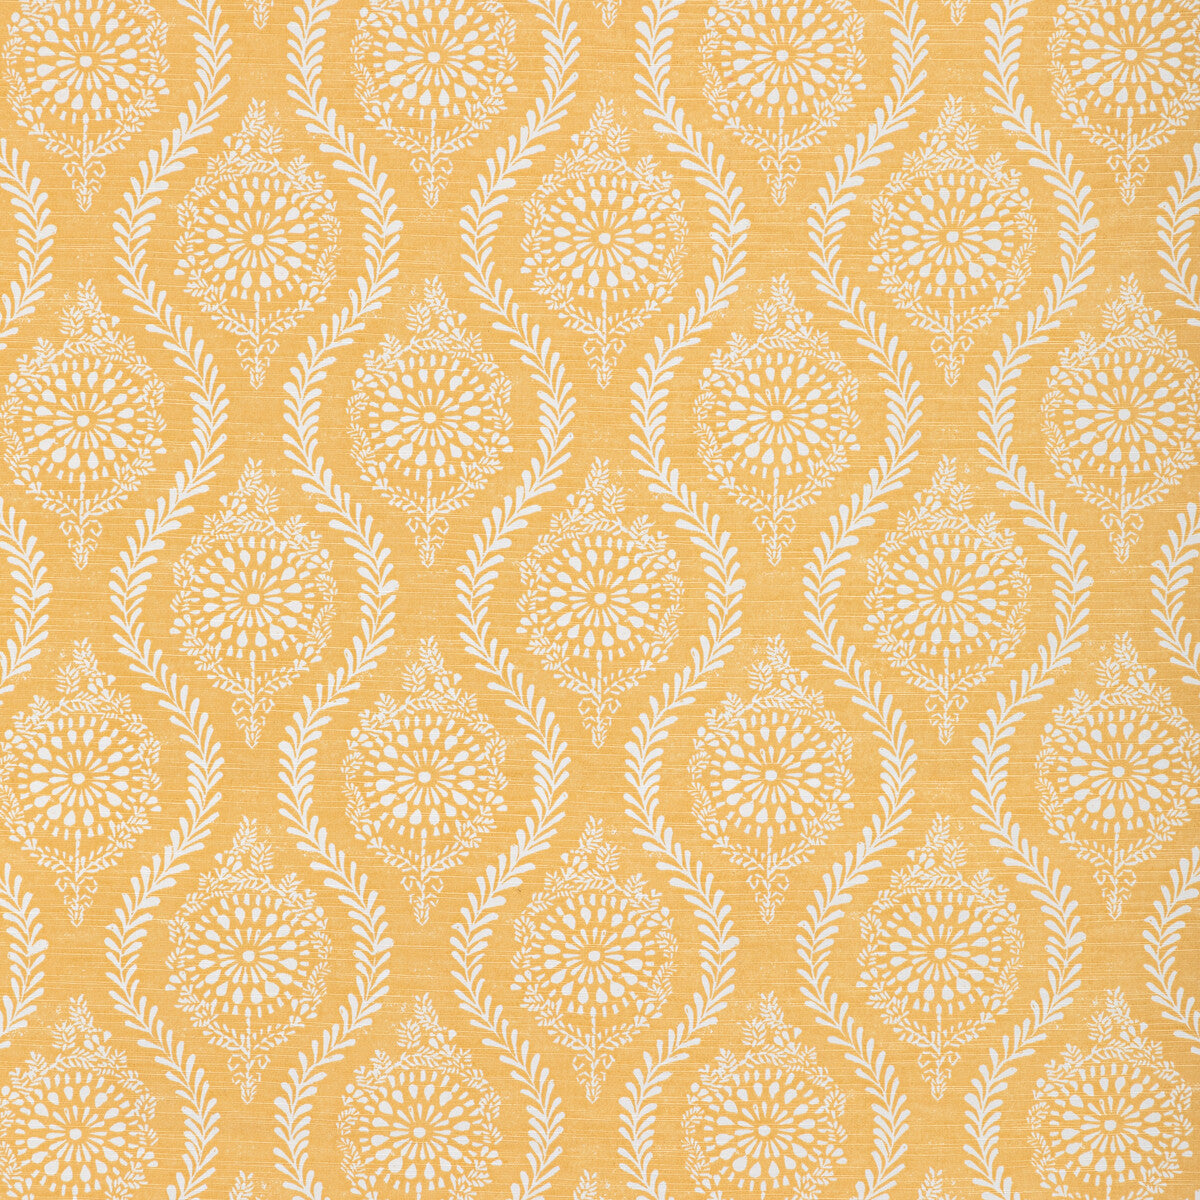 Marindol Print fabric in canary color - pattern 8022105.40.0 - by Brunschwig &amp; Fils in the Manoir collection